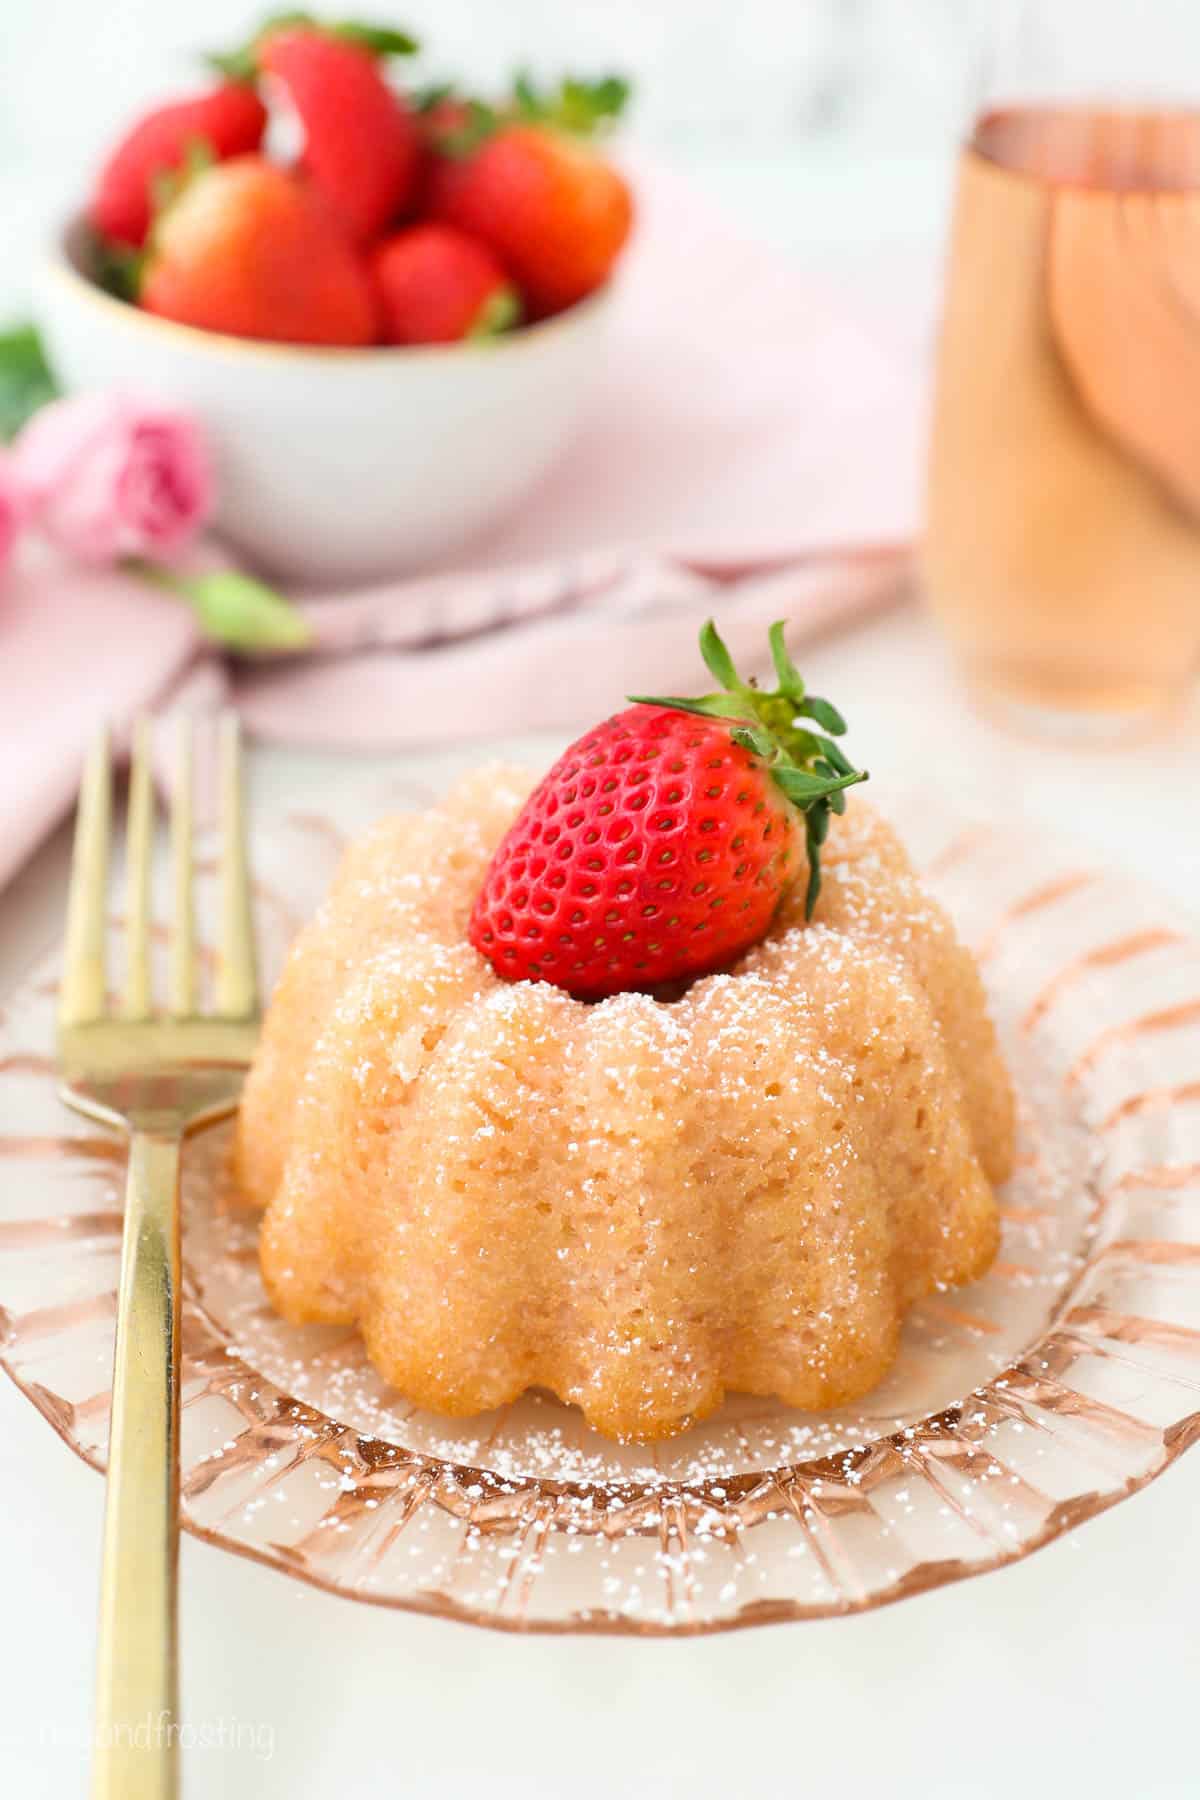 A pink glass glass with a mini bundt cake topped with a strawberry